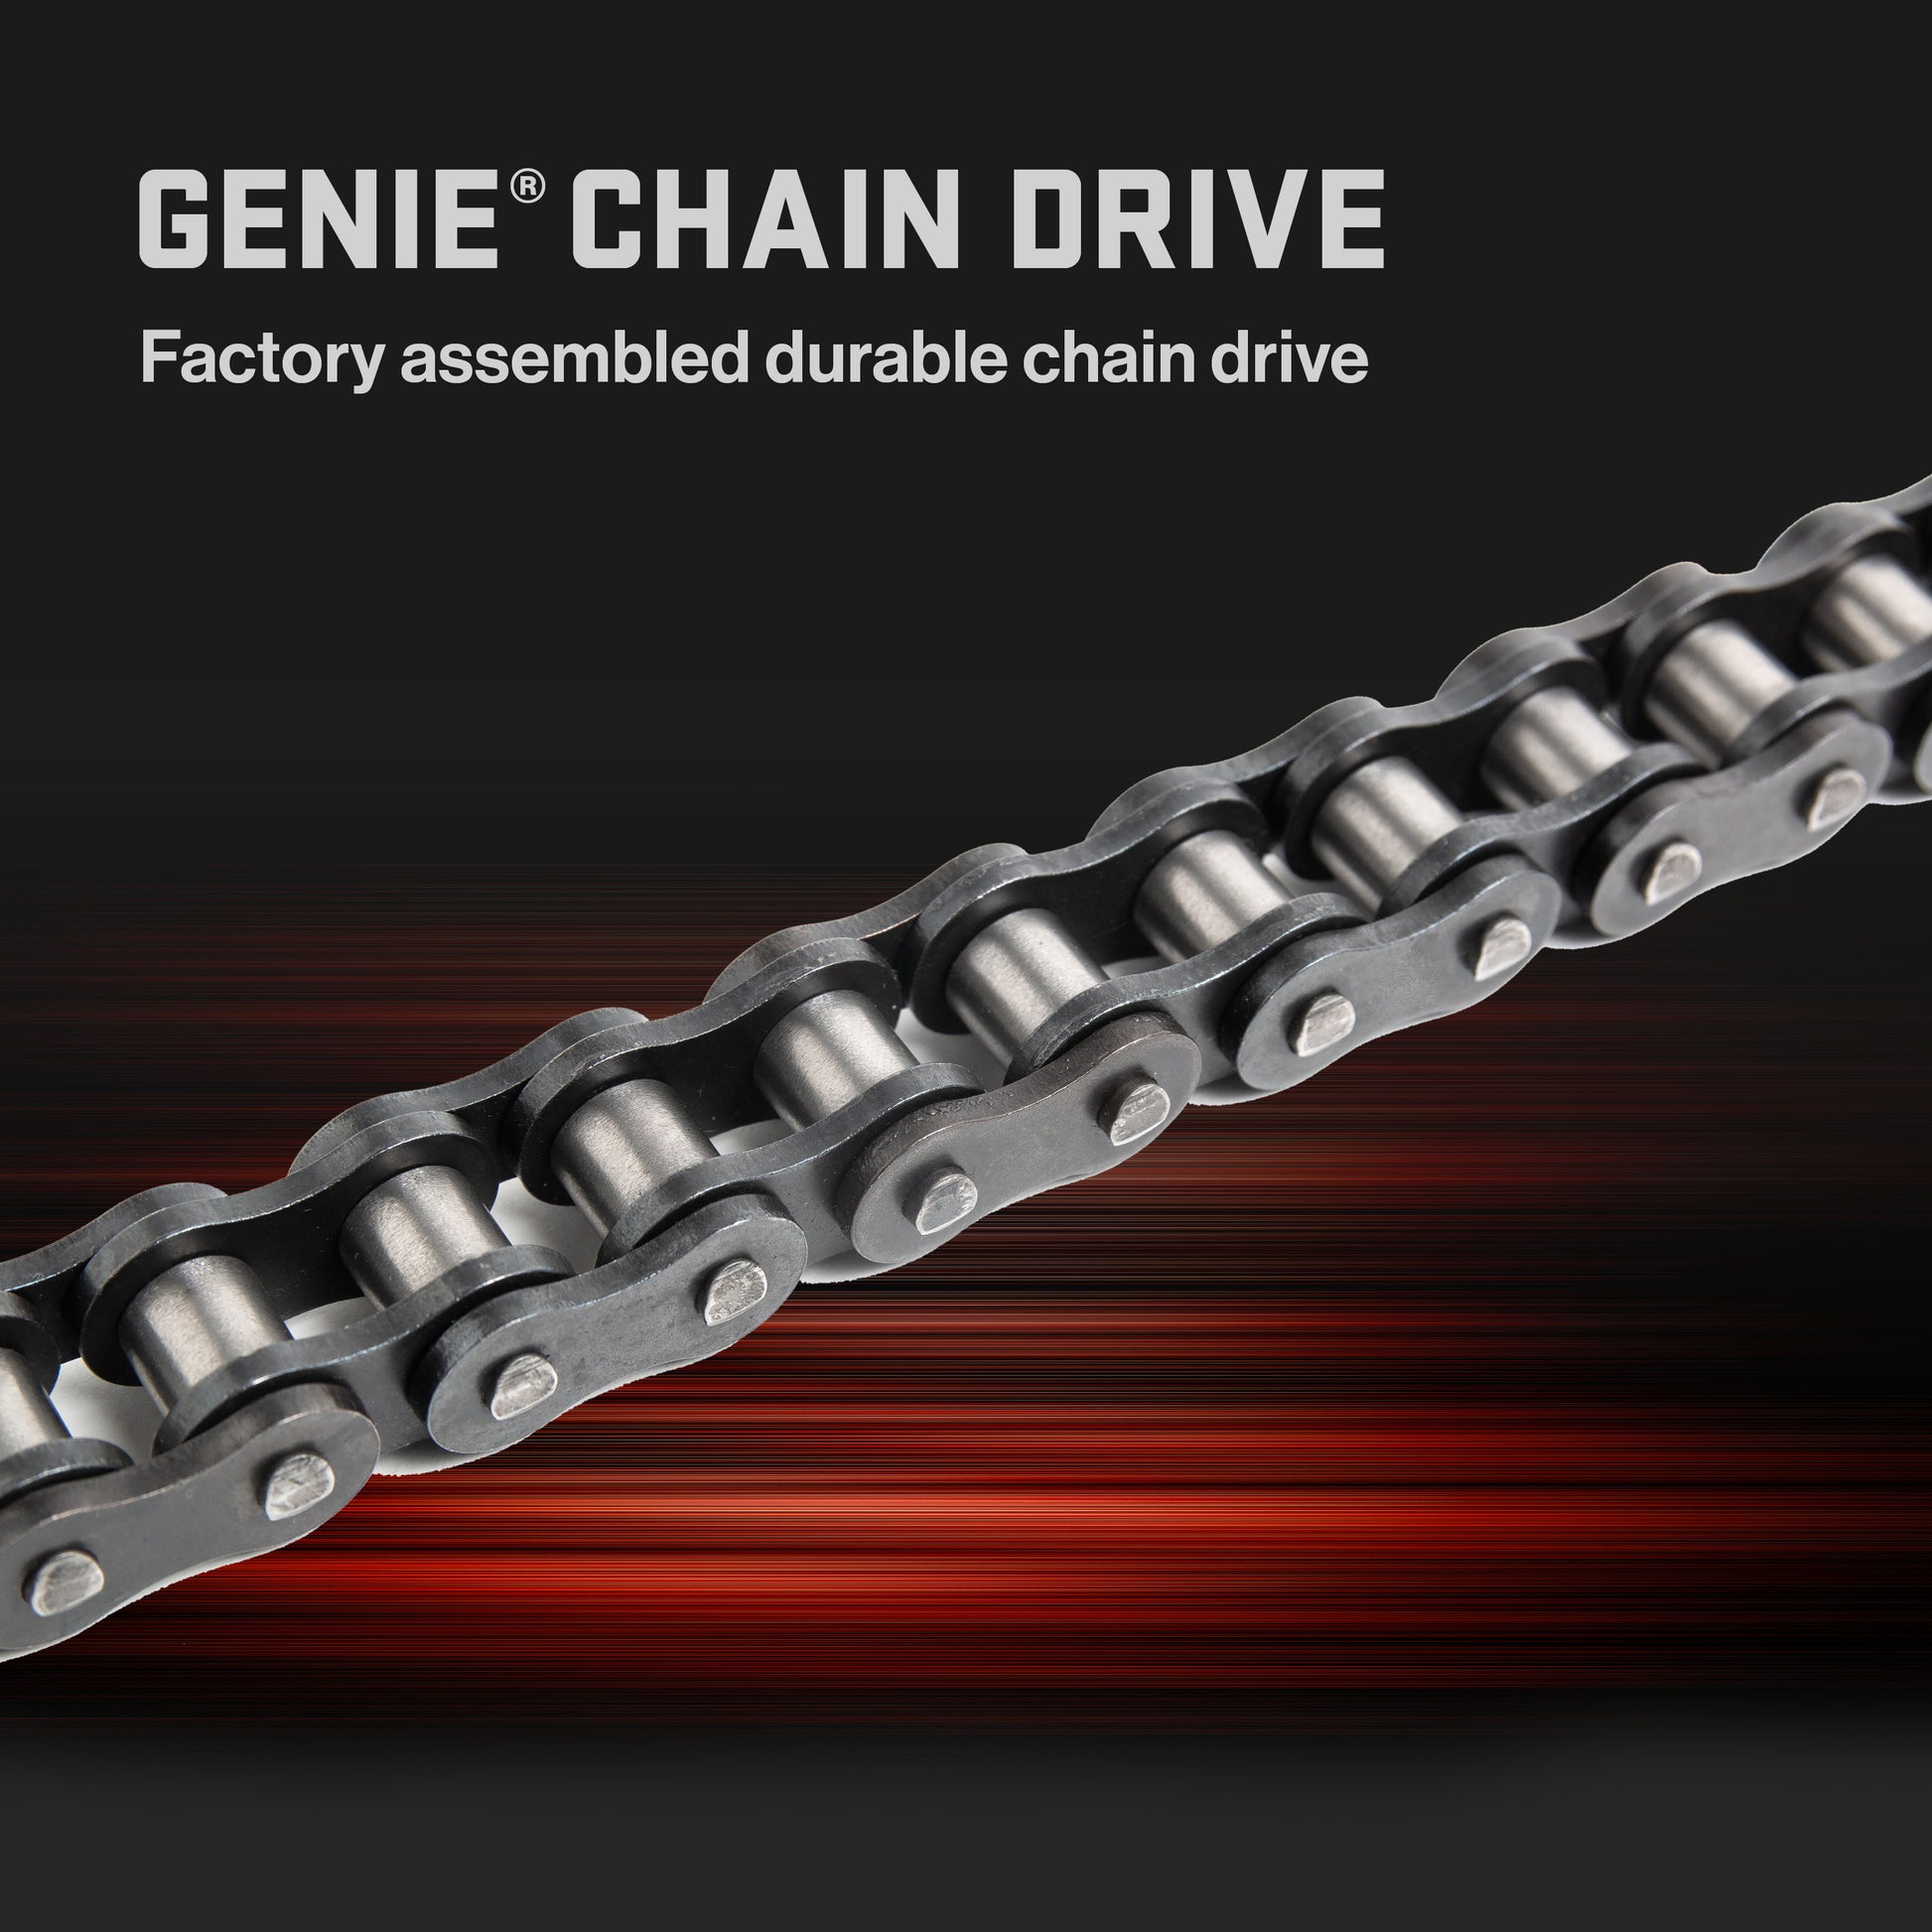 Genie Chain Drive Factory Assembled and Durable